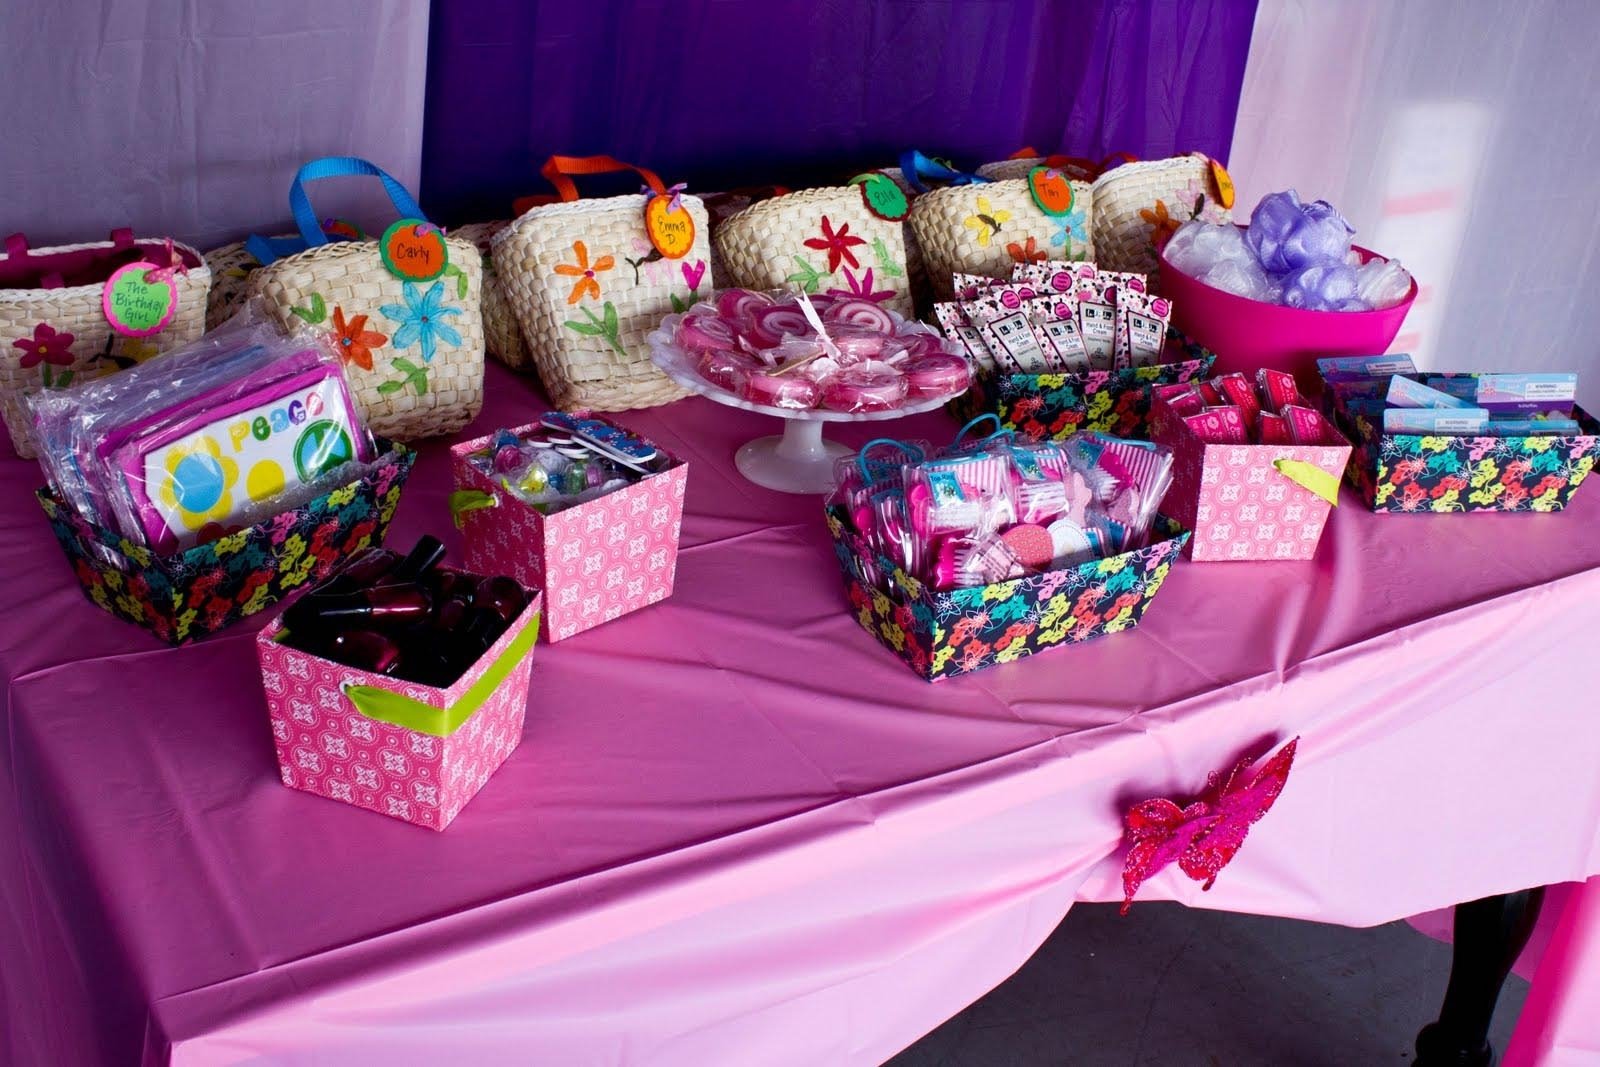 10 Trendy Ideas For Girls Birthday Parties girls birthday party spa home ideas wondrous bedroom ideas 2022